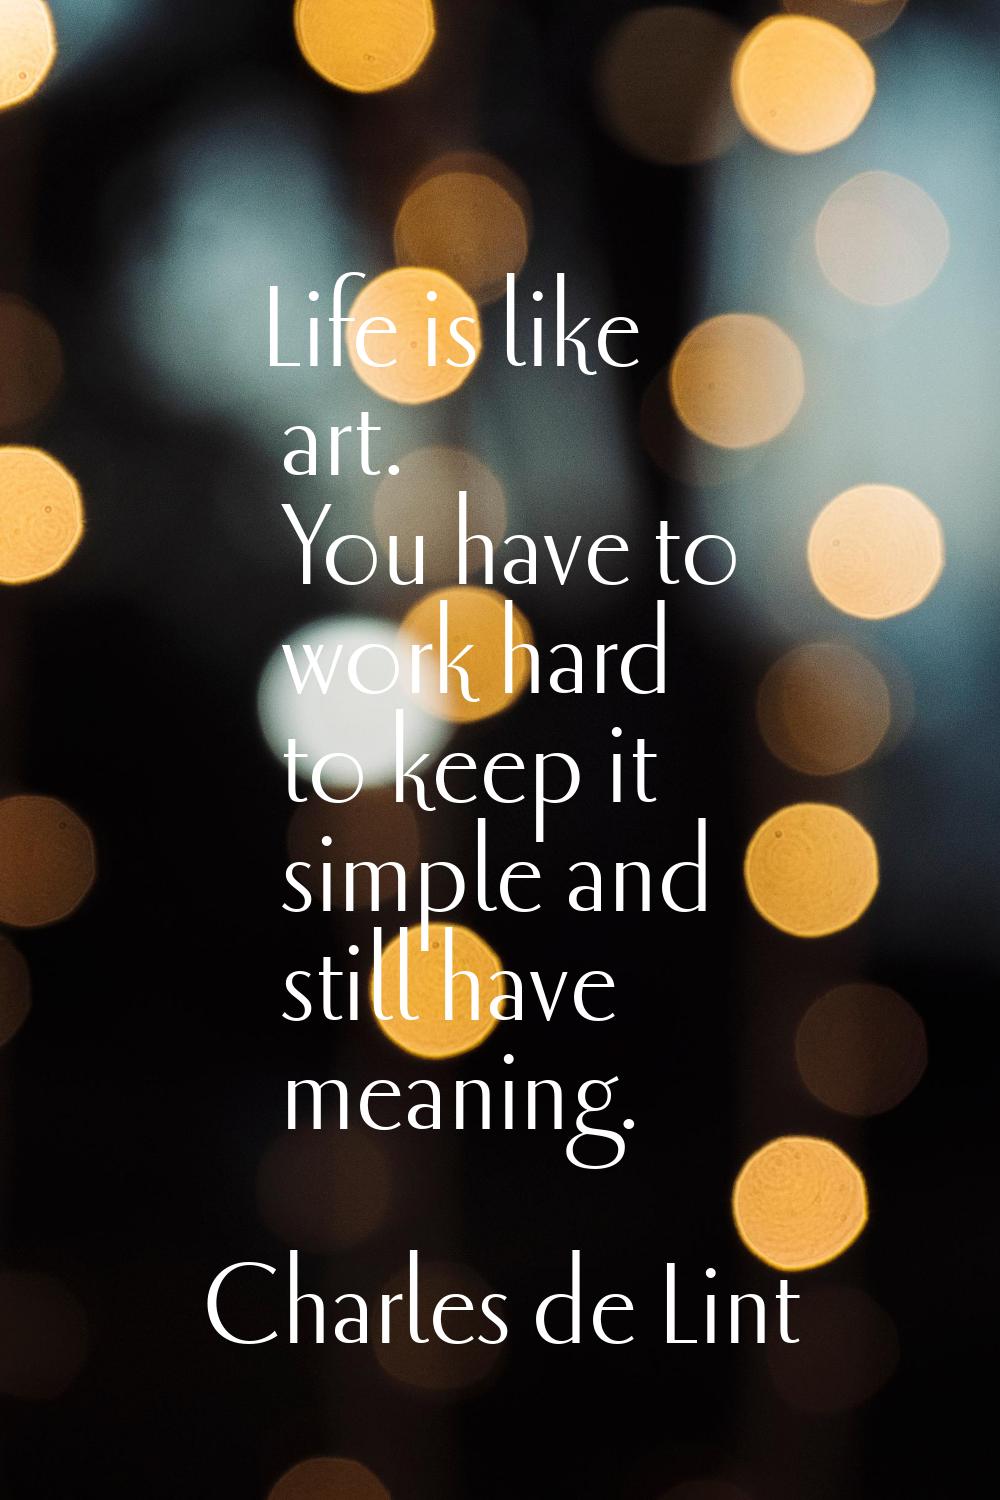 Life is like art. You have to work hard to keep it simple and still have meaning.